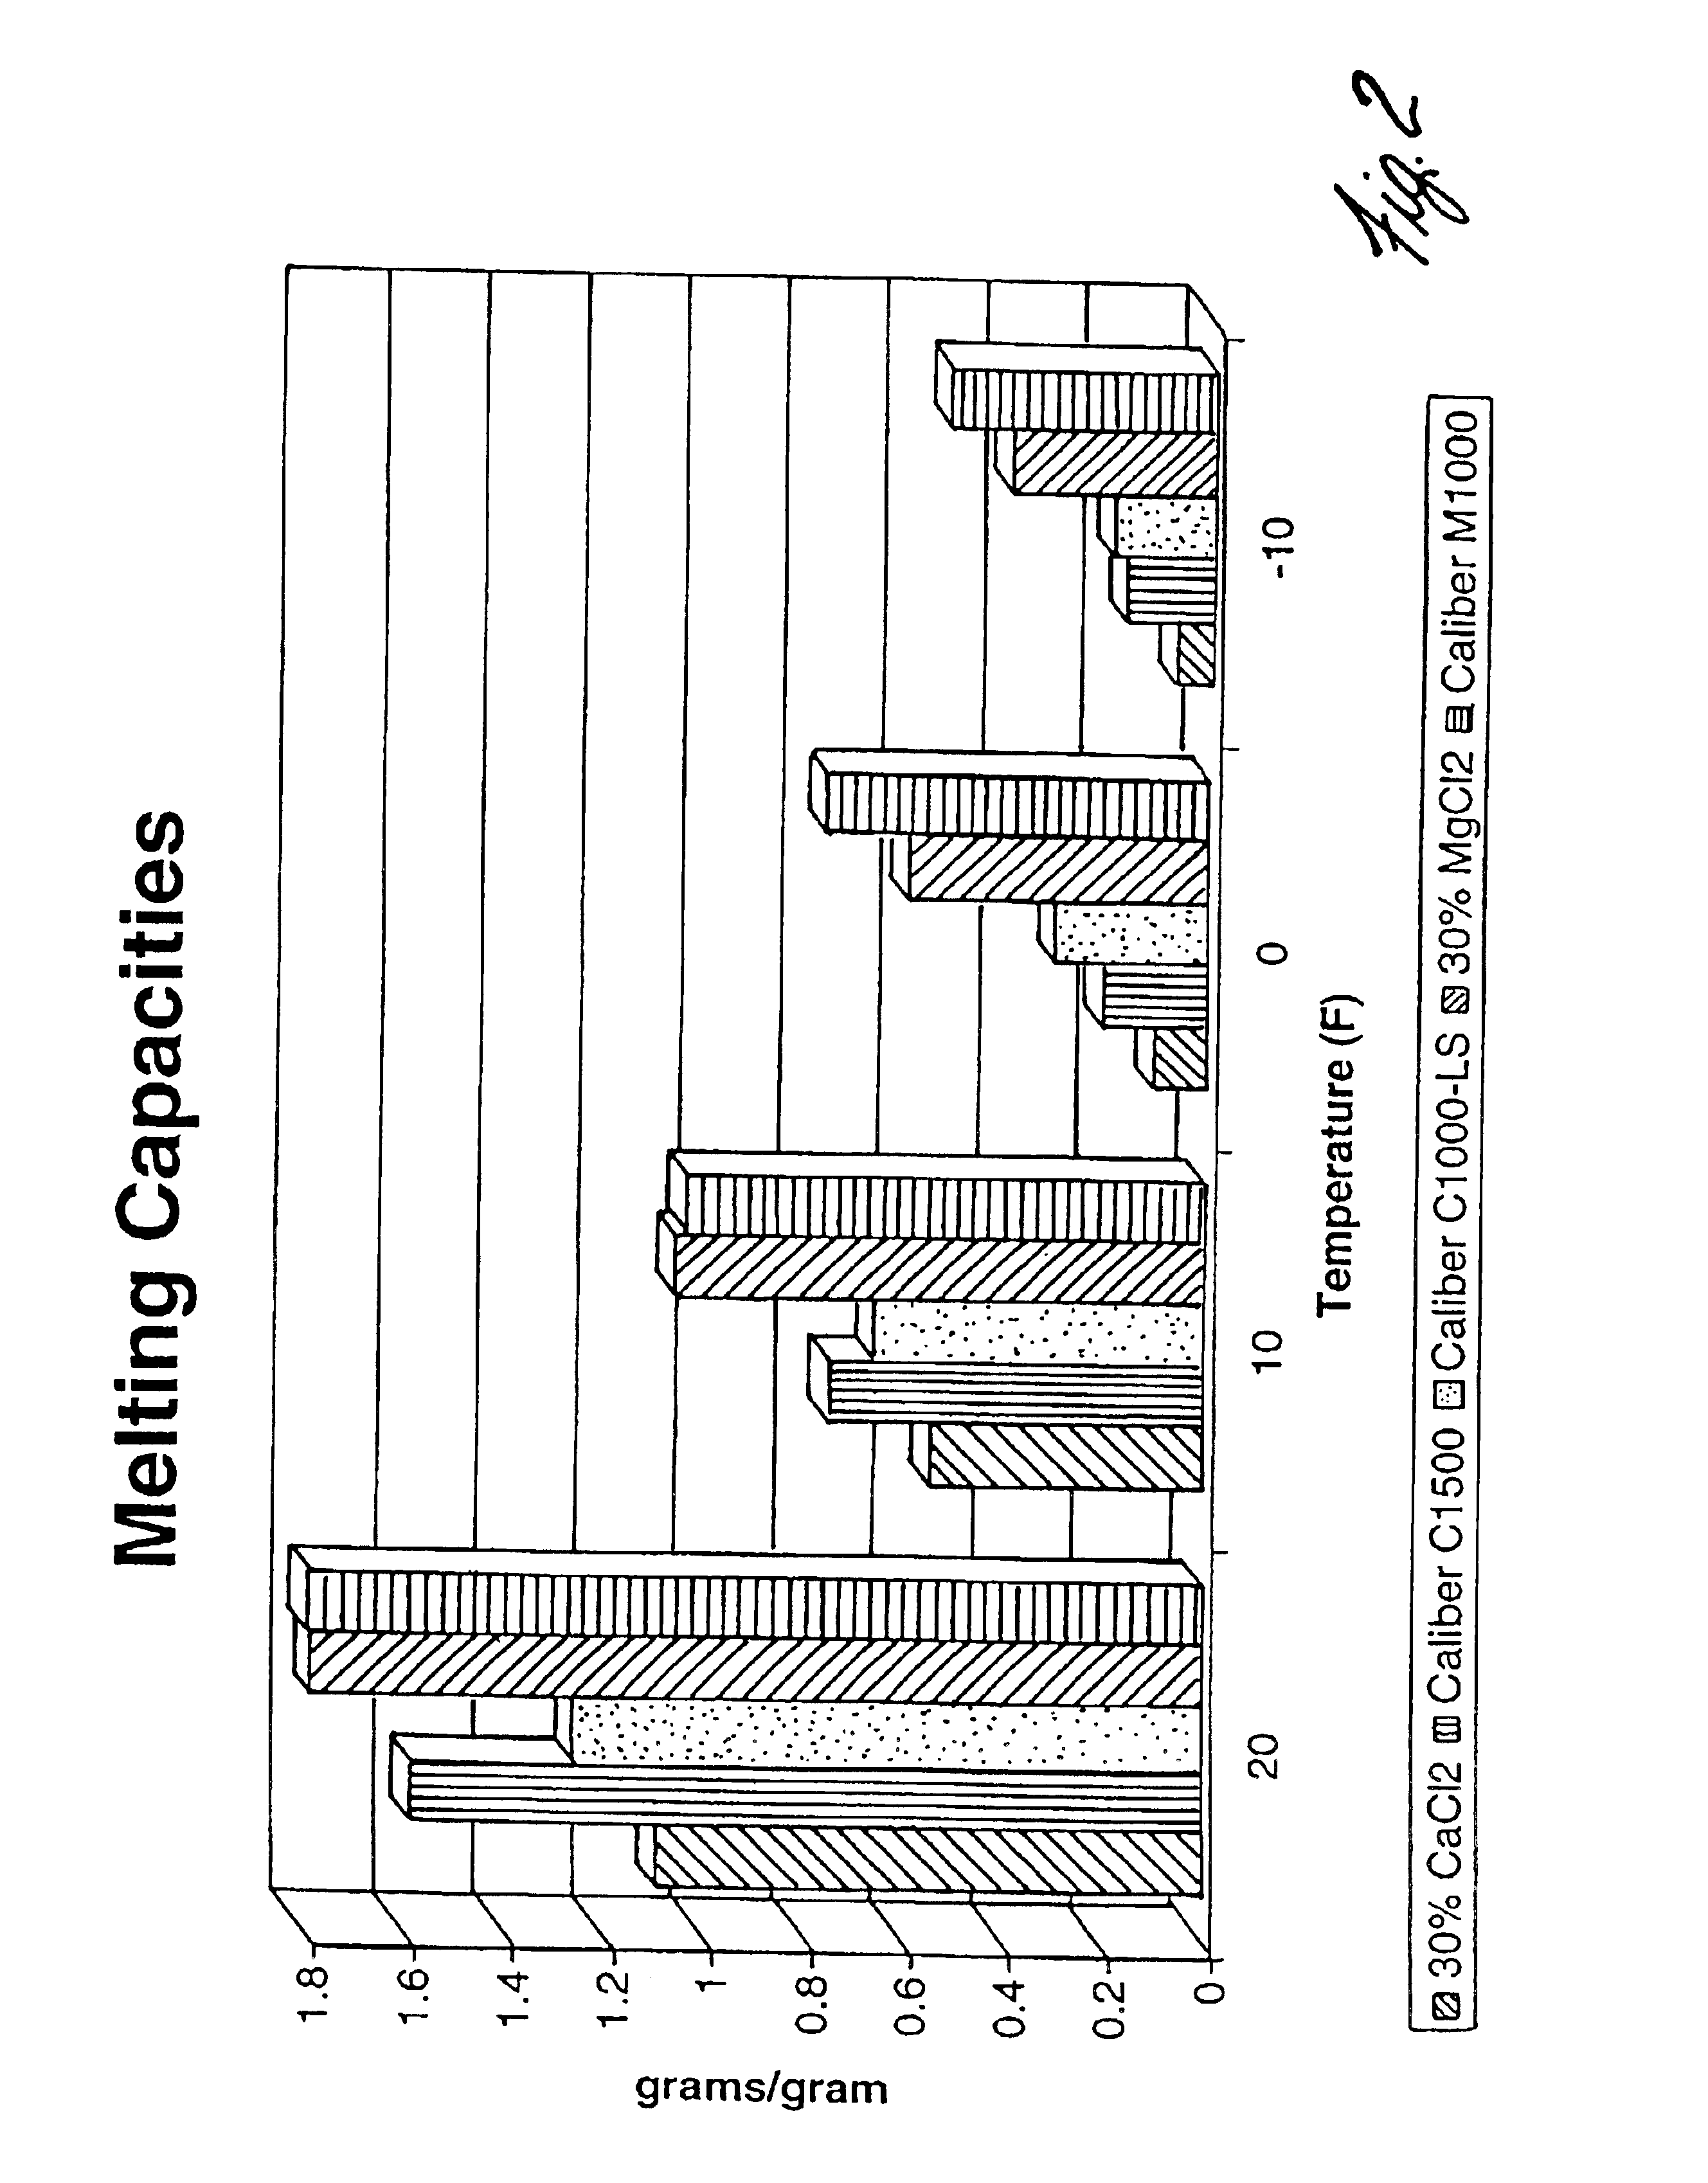 De-icing composition and method